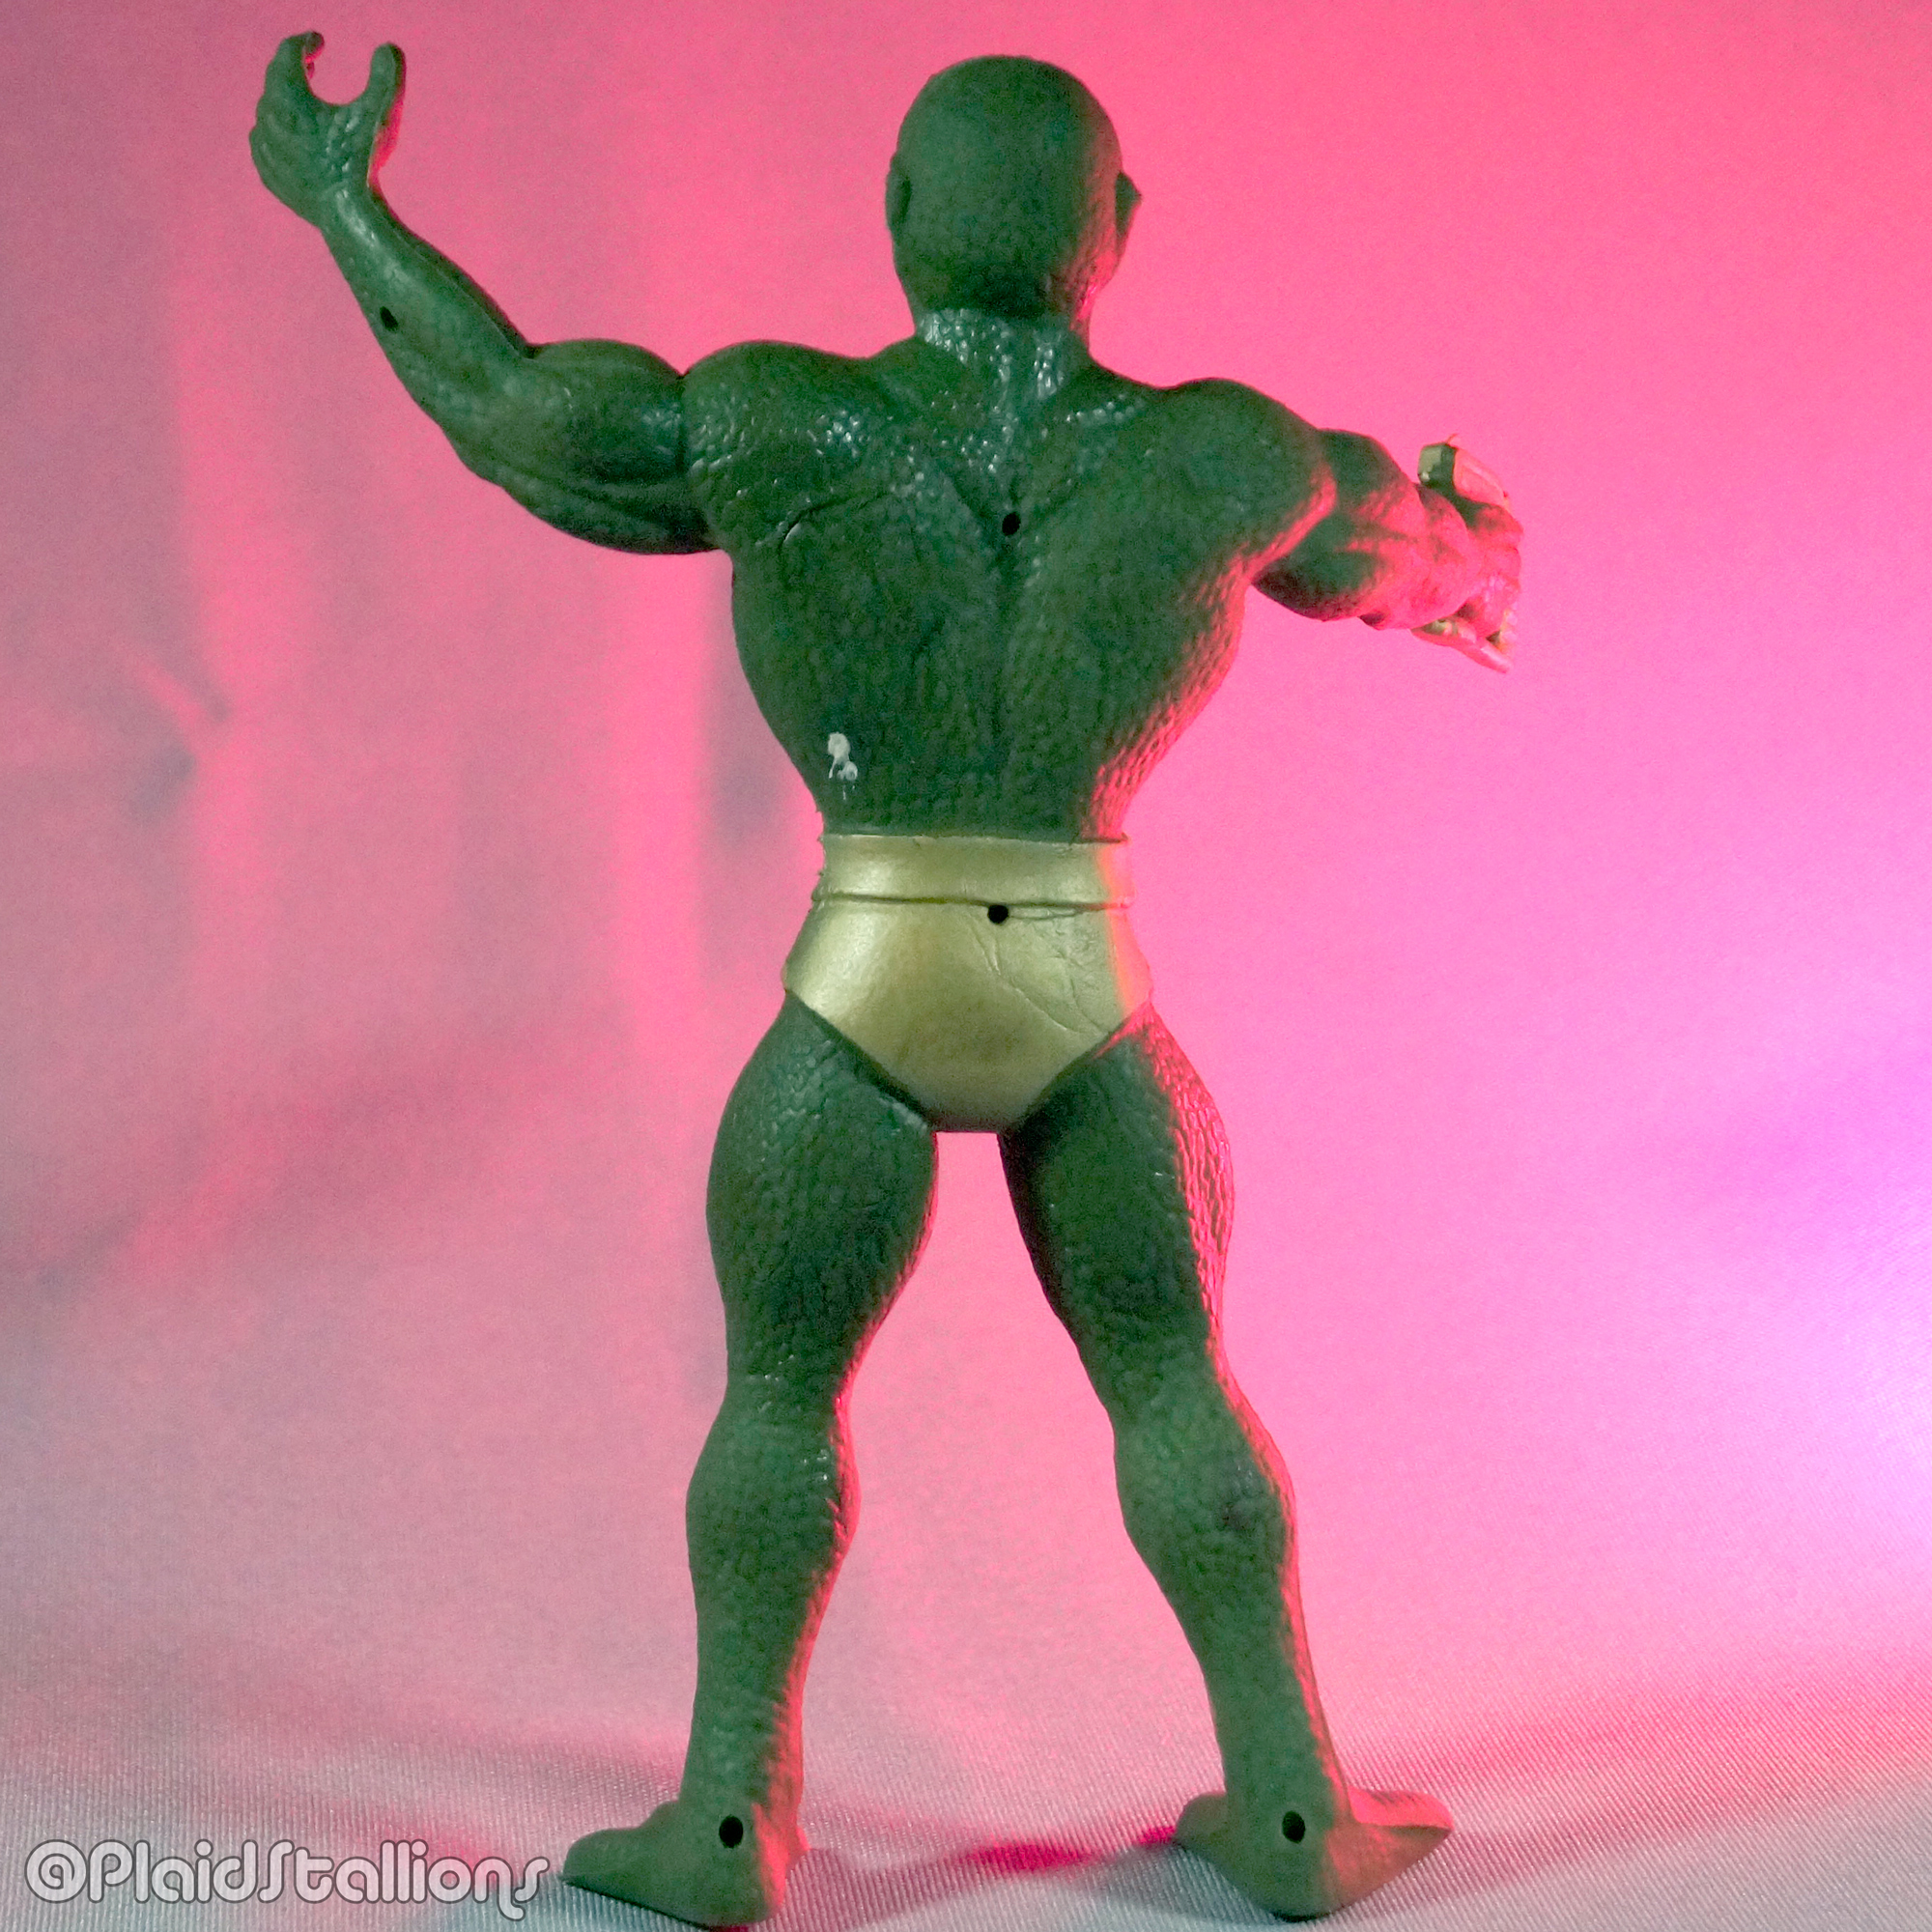 New Book! Knock-Offs: Totally Unauthorized Action Figures by